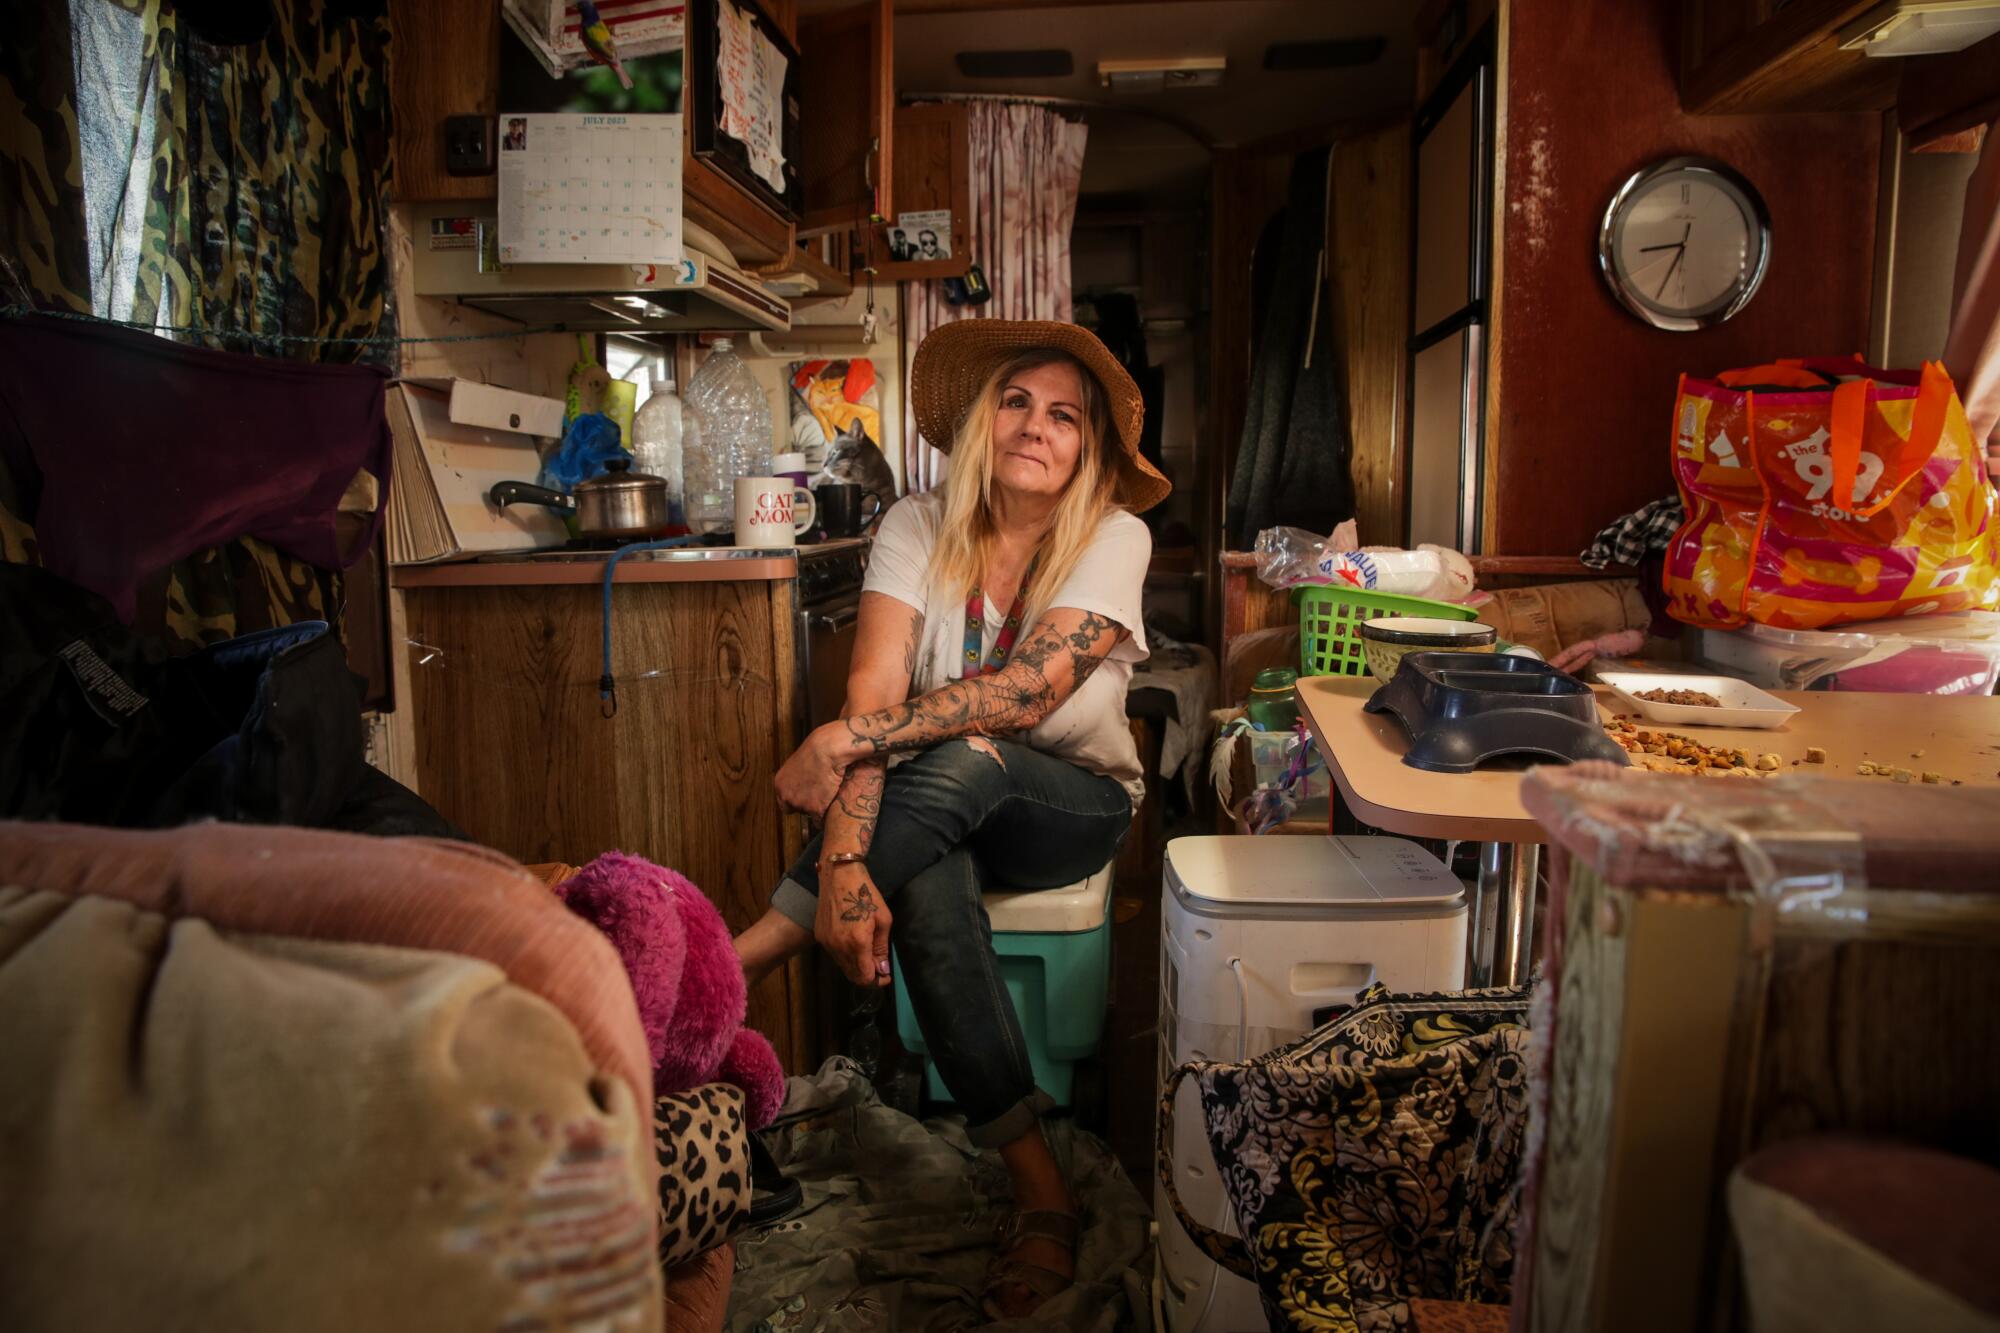 A person sits inside a cramped room.